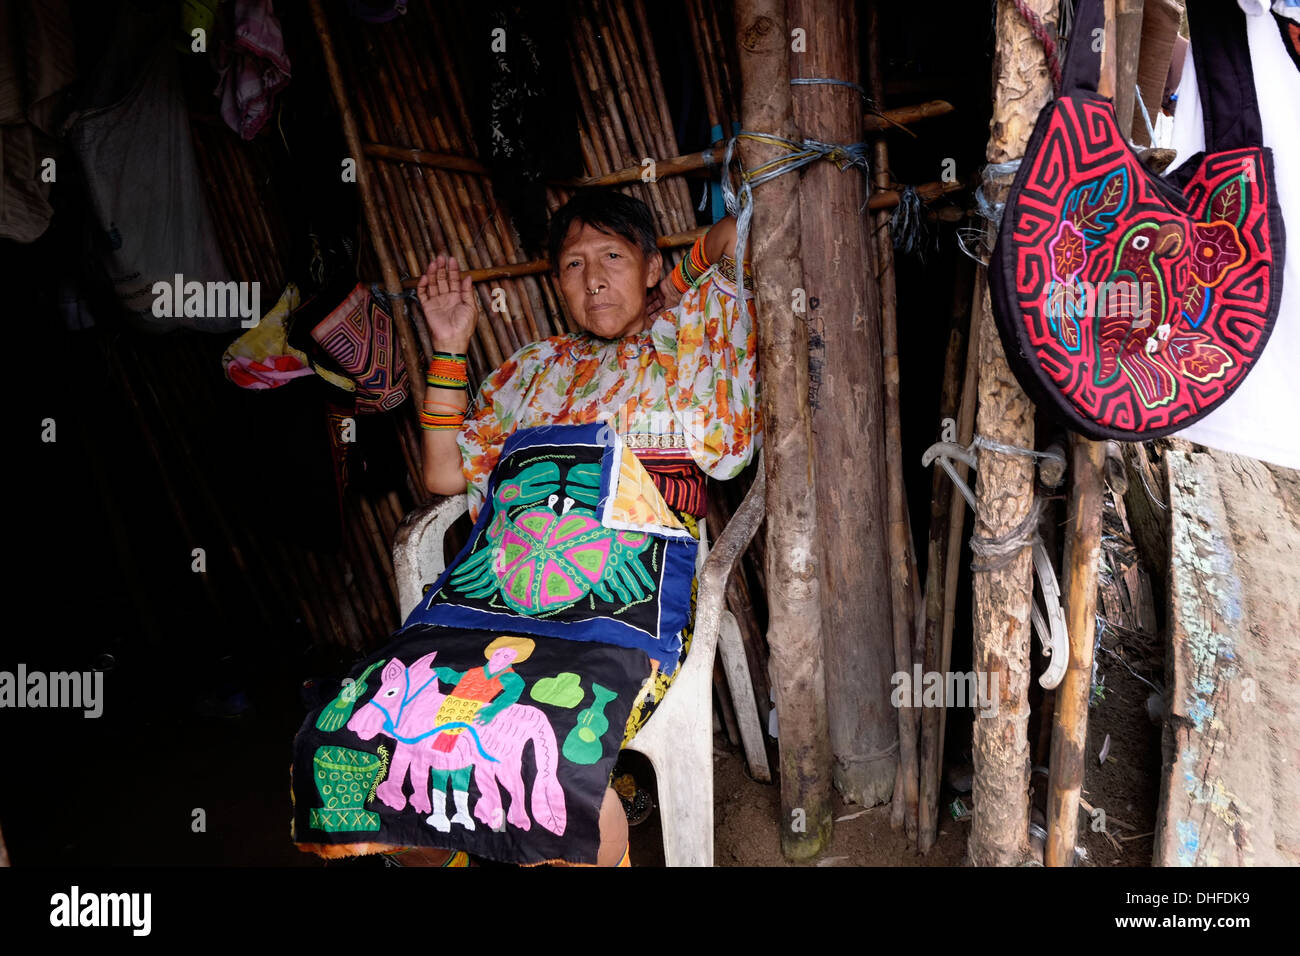 A woman from the Guna people displays a selection of traditional hand-made molas for sale at her home in Carti Sugtupu island village administered by Guna natives known as Kuna in the 'Comarca' (region) of the Guna Yala located in the archipelago of San Blas Blas islands in the Northeast of Panama facing the Caribbean Sea. Stock Photo